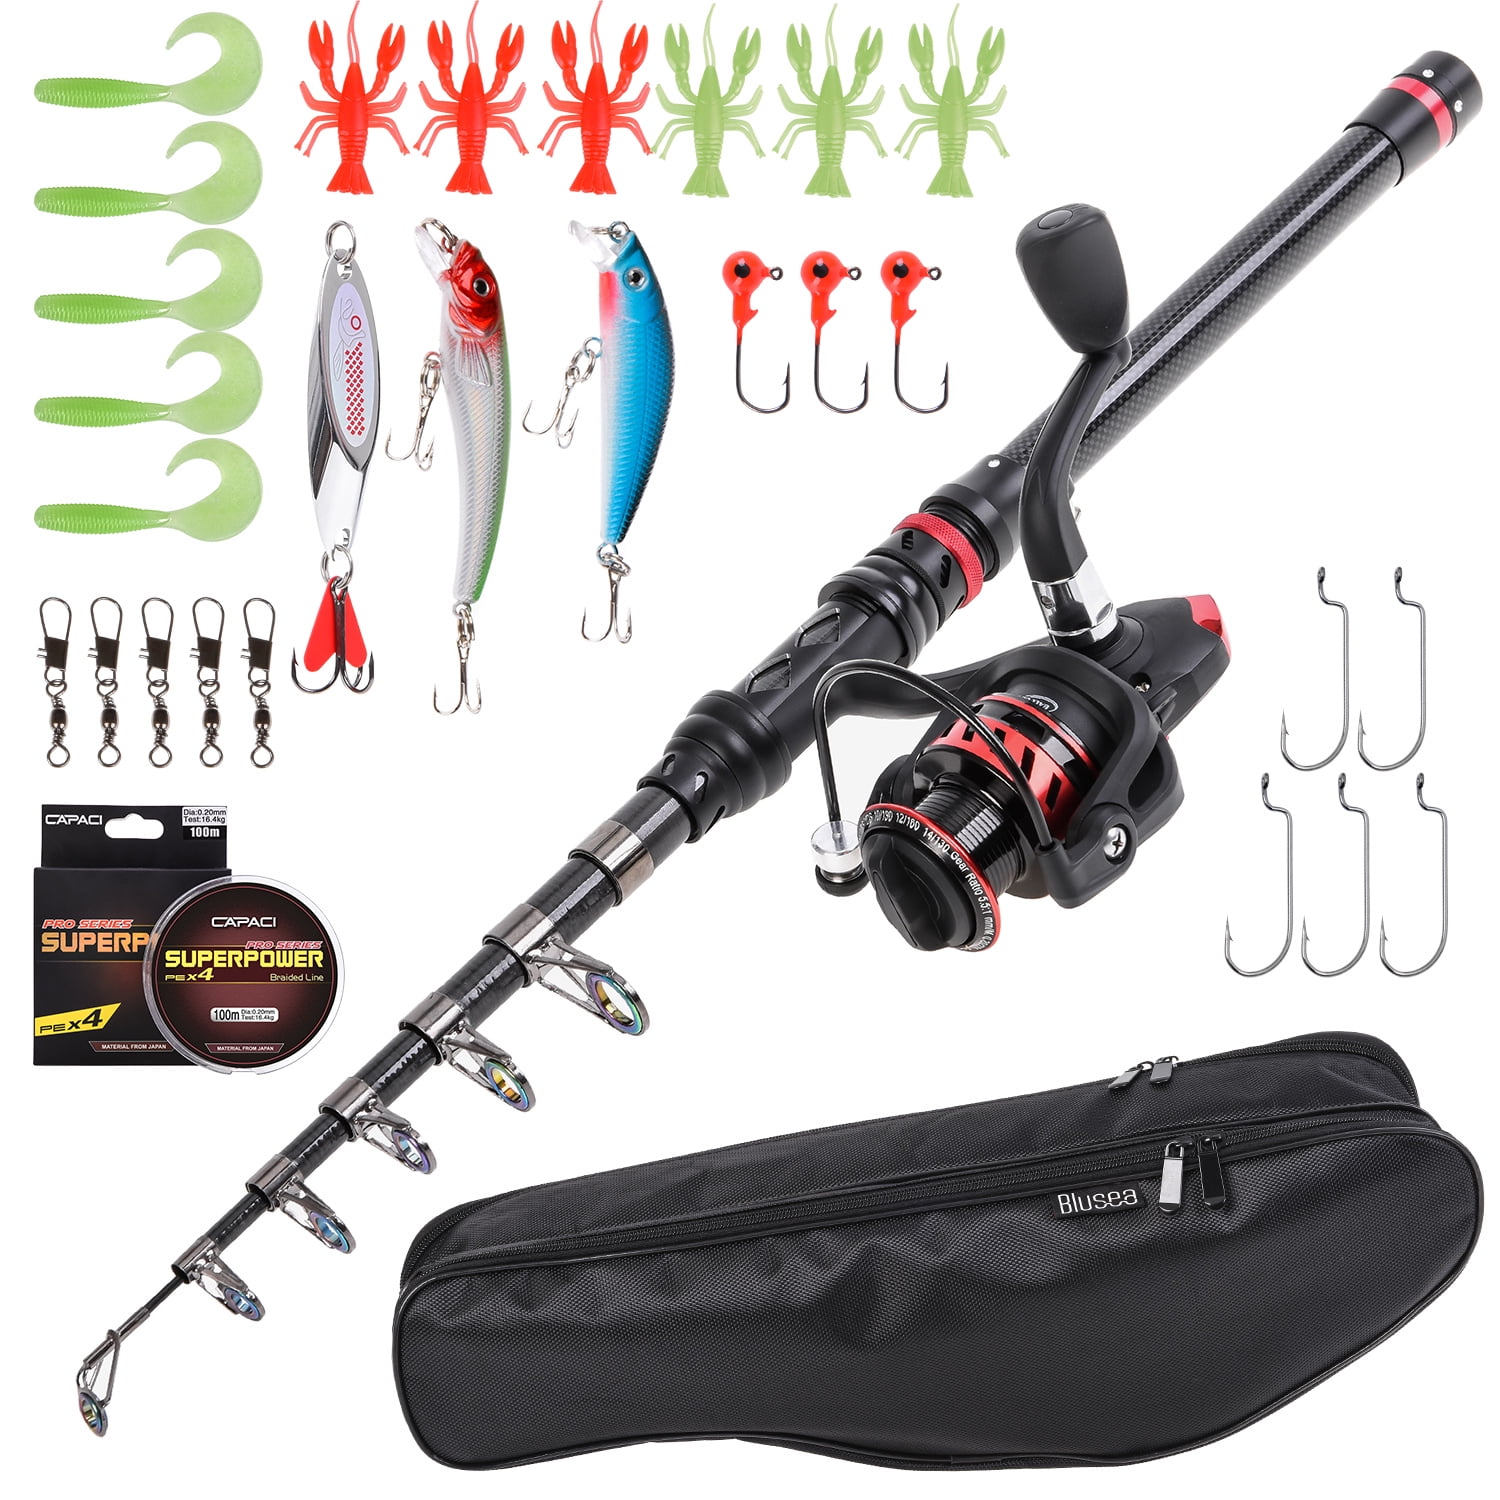 Portable Fishing Rod Lure Carbon Spinning Casting Lure Professional Fishing Rod 